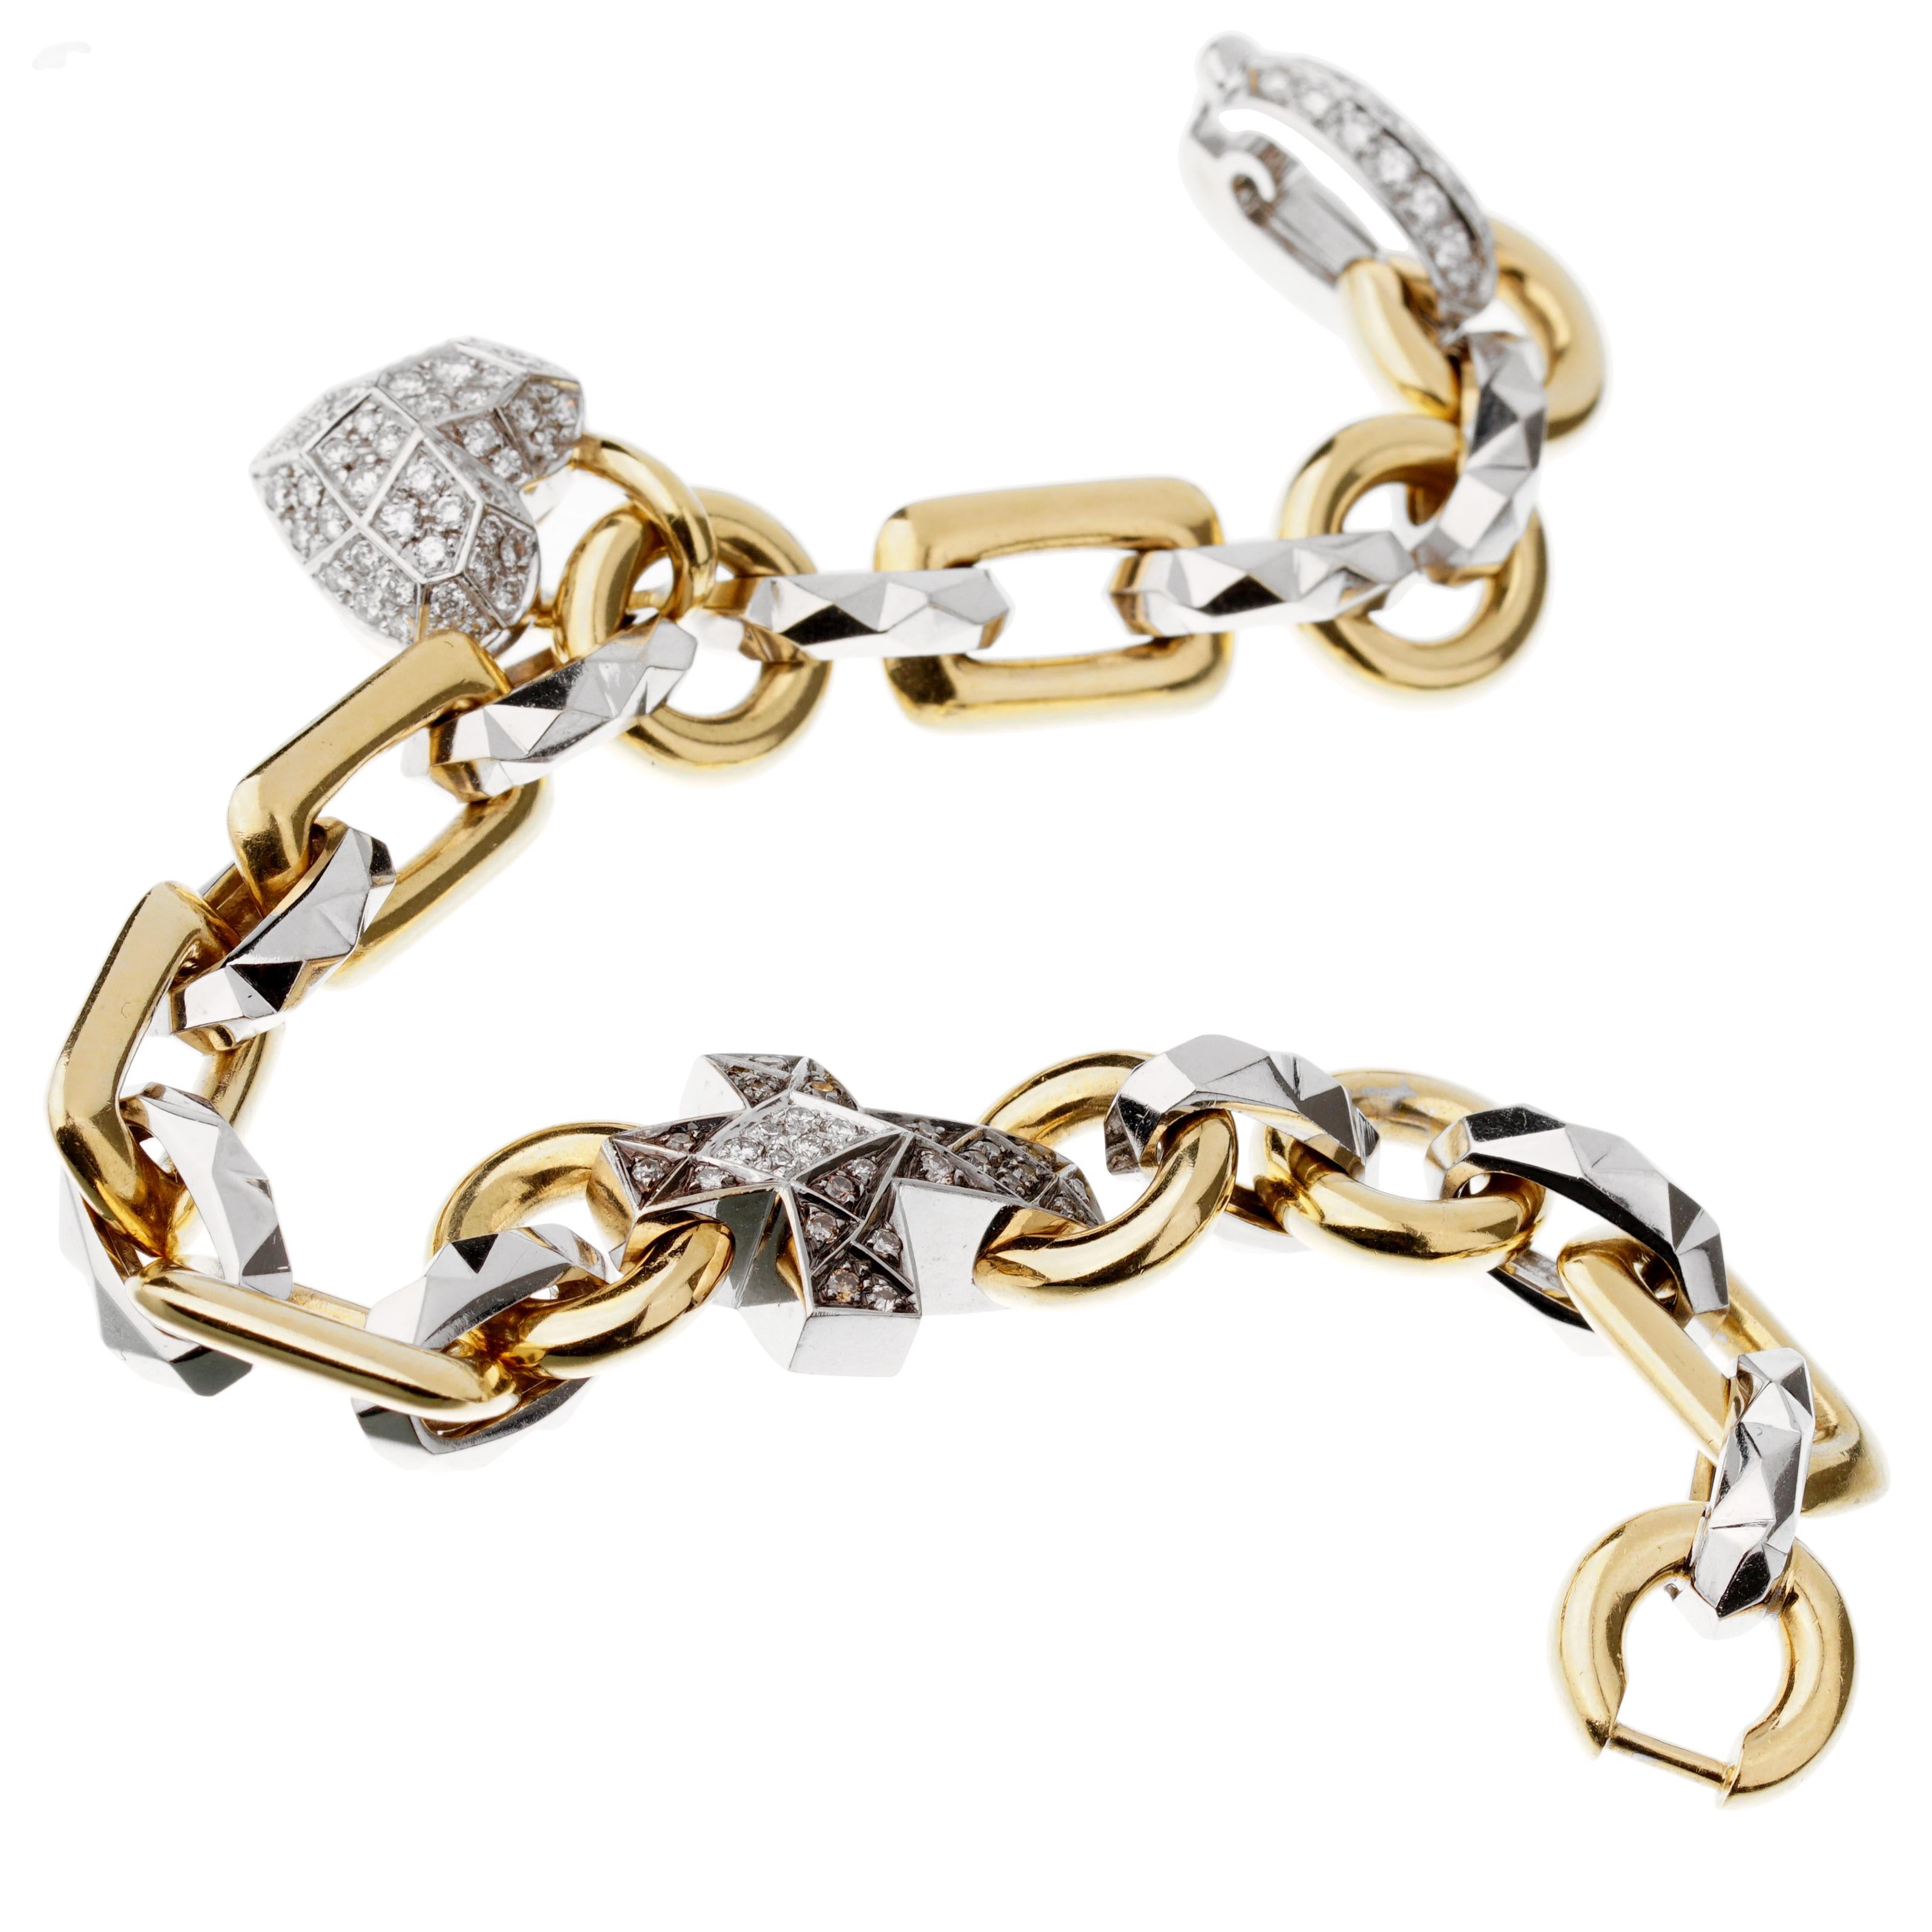 A unique bracelet by Mikimoto showcasing a faceted heart and cross adorned with round brilliant cut diamonds (.90ct) in 18k white and yellow gold. The bracelet measures 7.4